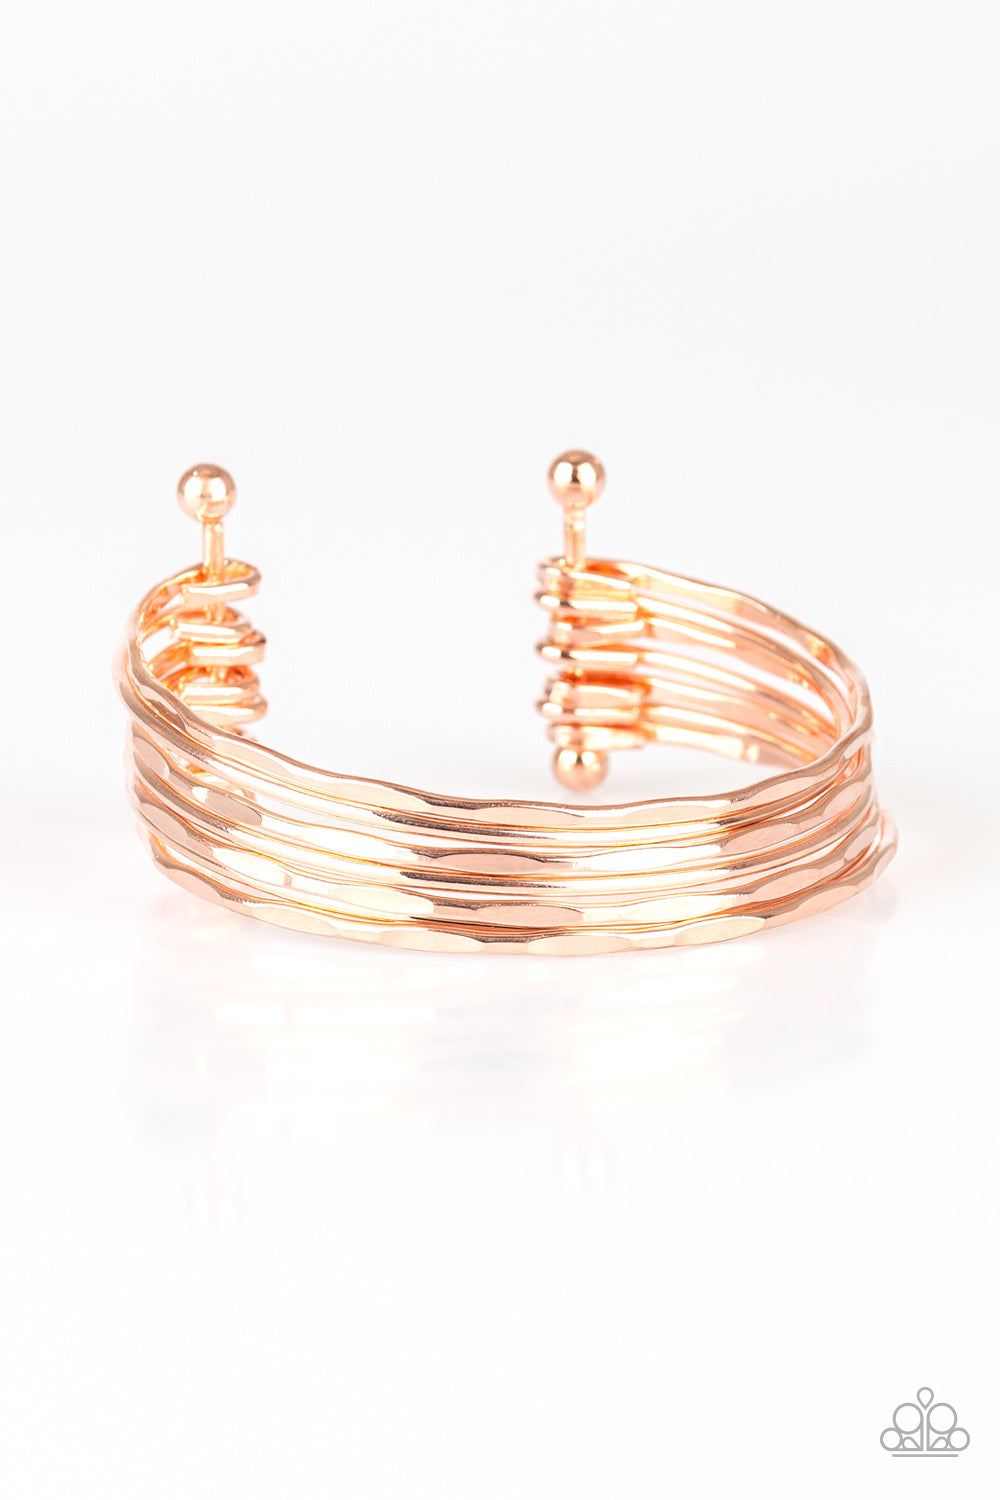 timelessly-textured-rose-gold-p9ba-gdrs-059xx